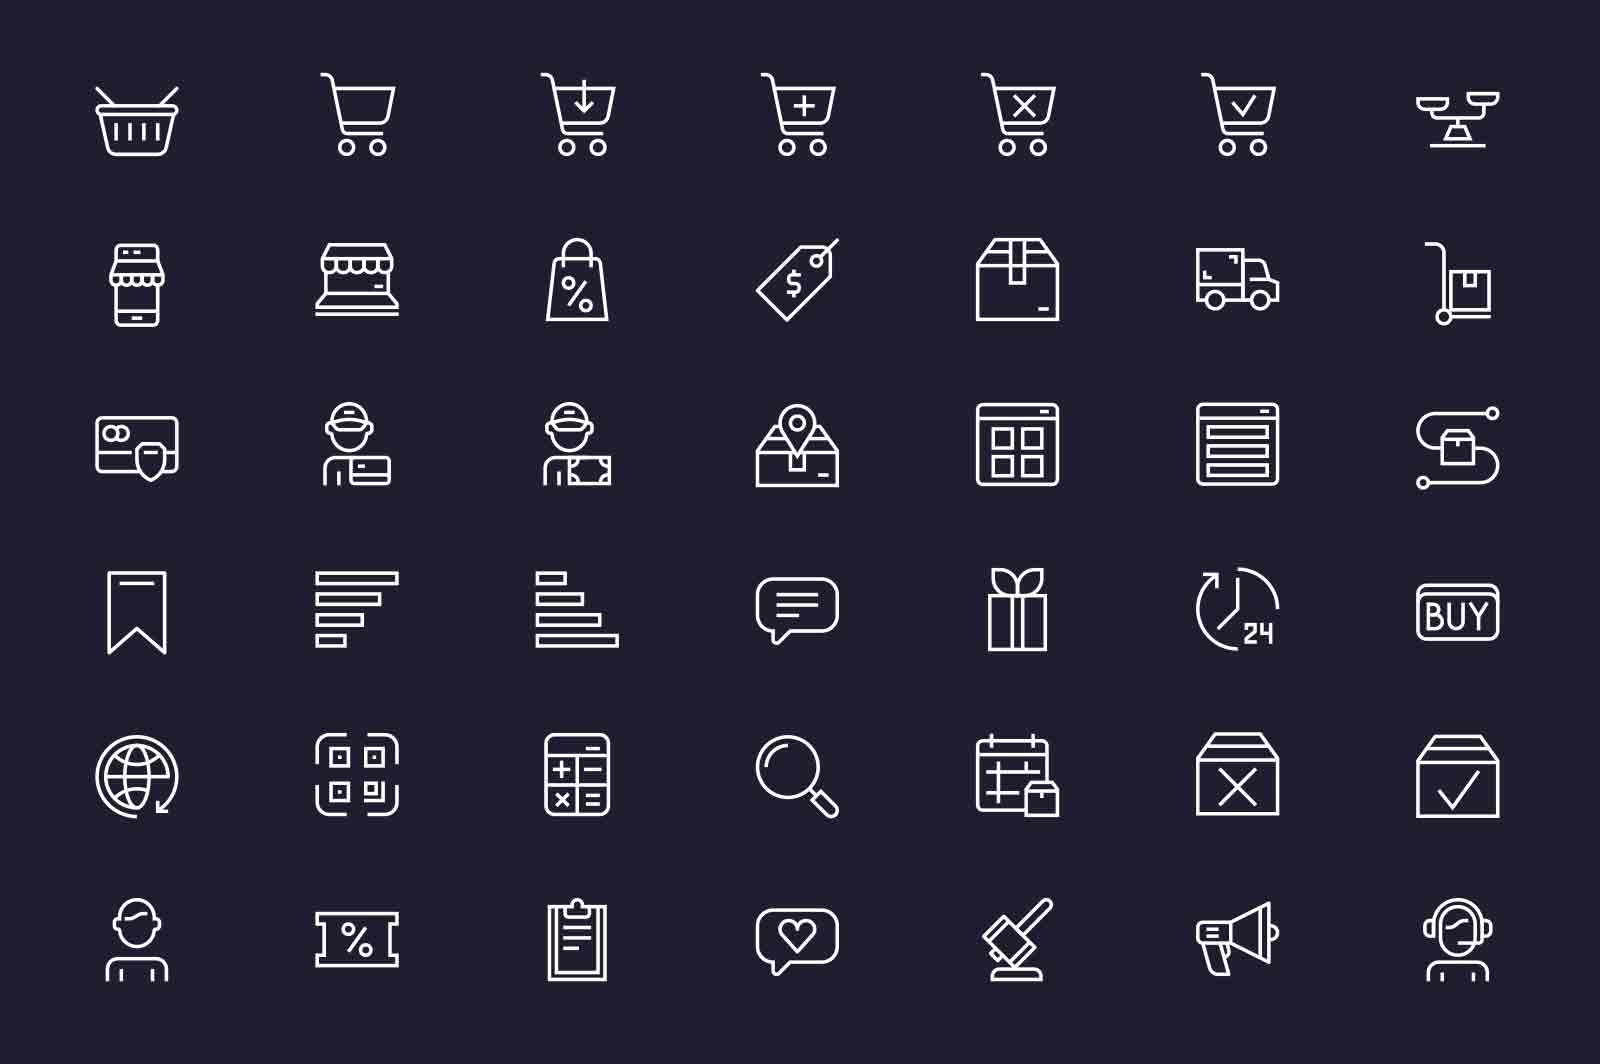 Online shopping and making order icons set vector illustration. Shopping cart, assortment, sale line icon. Dark background